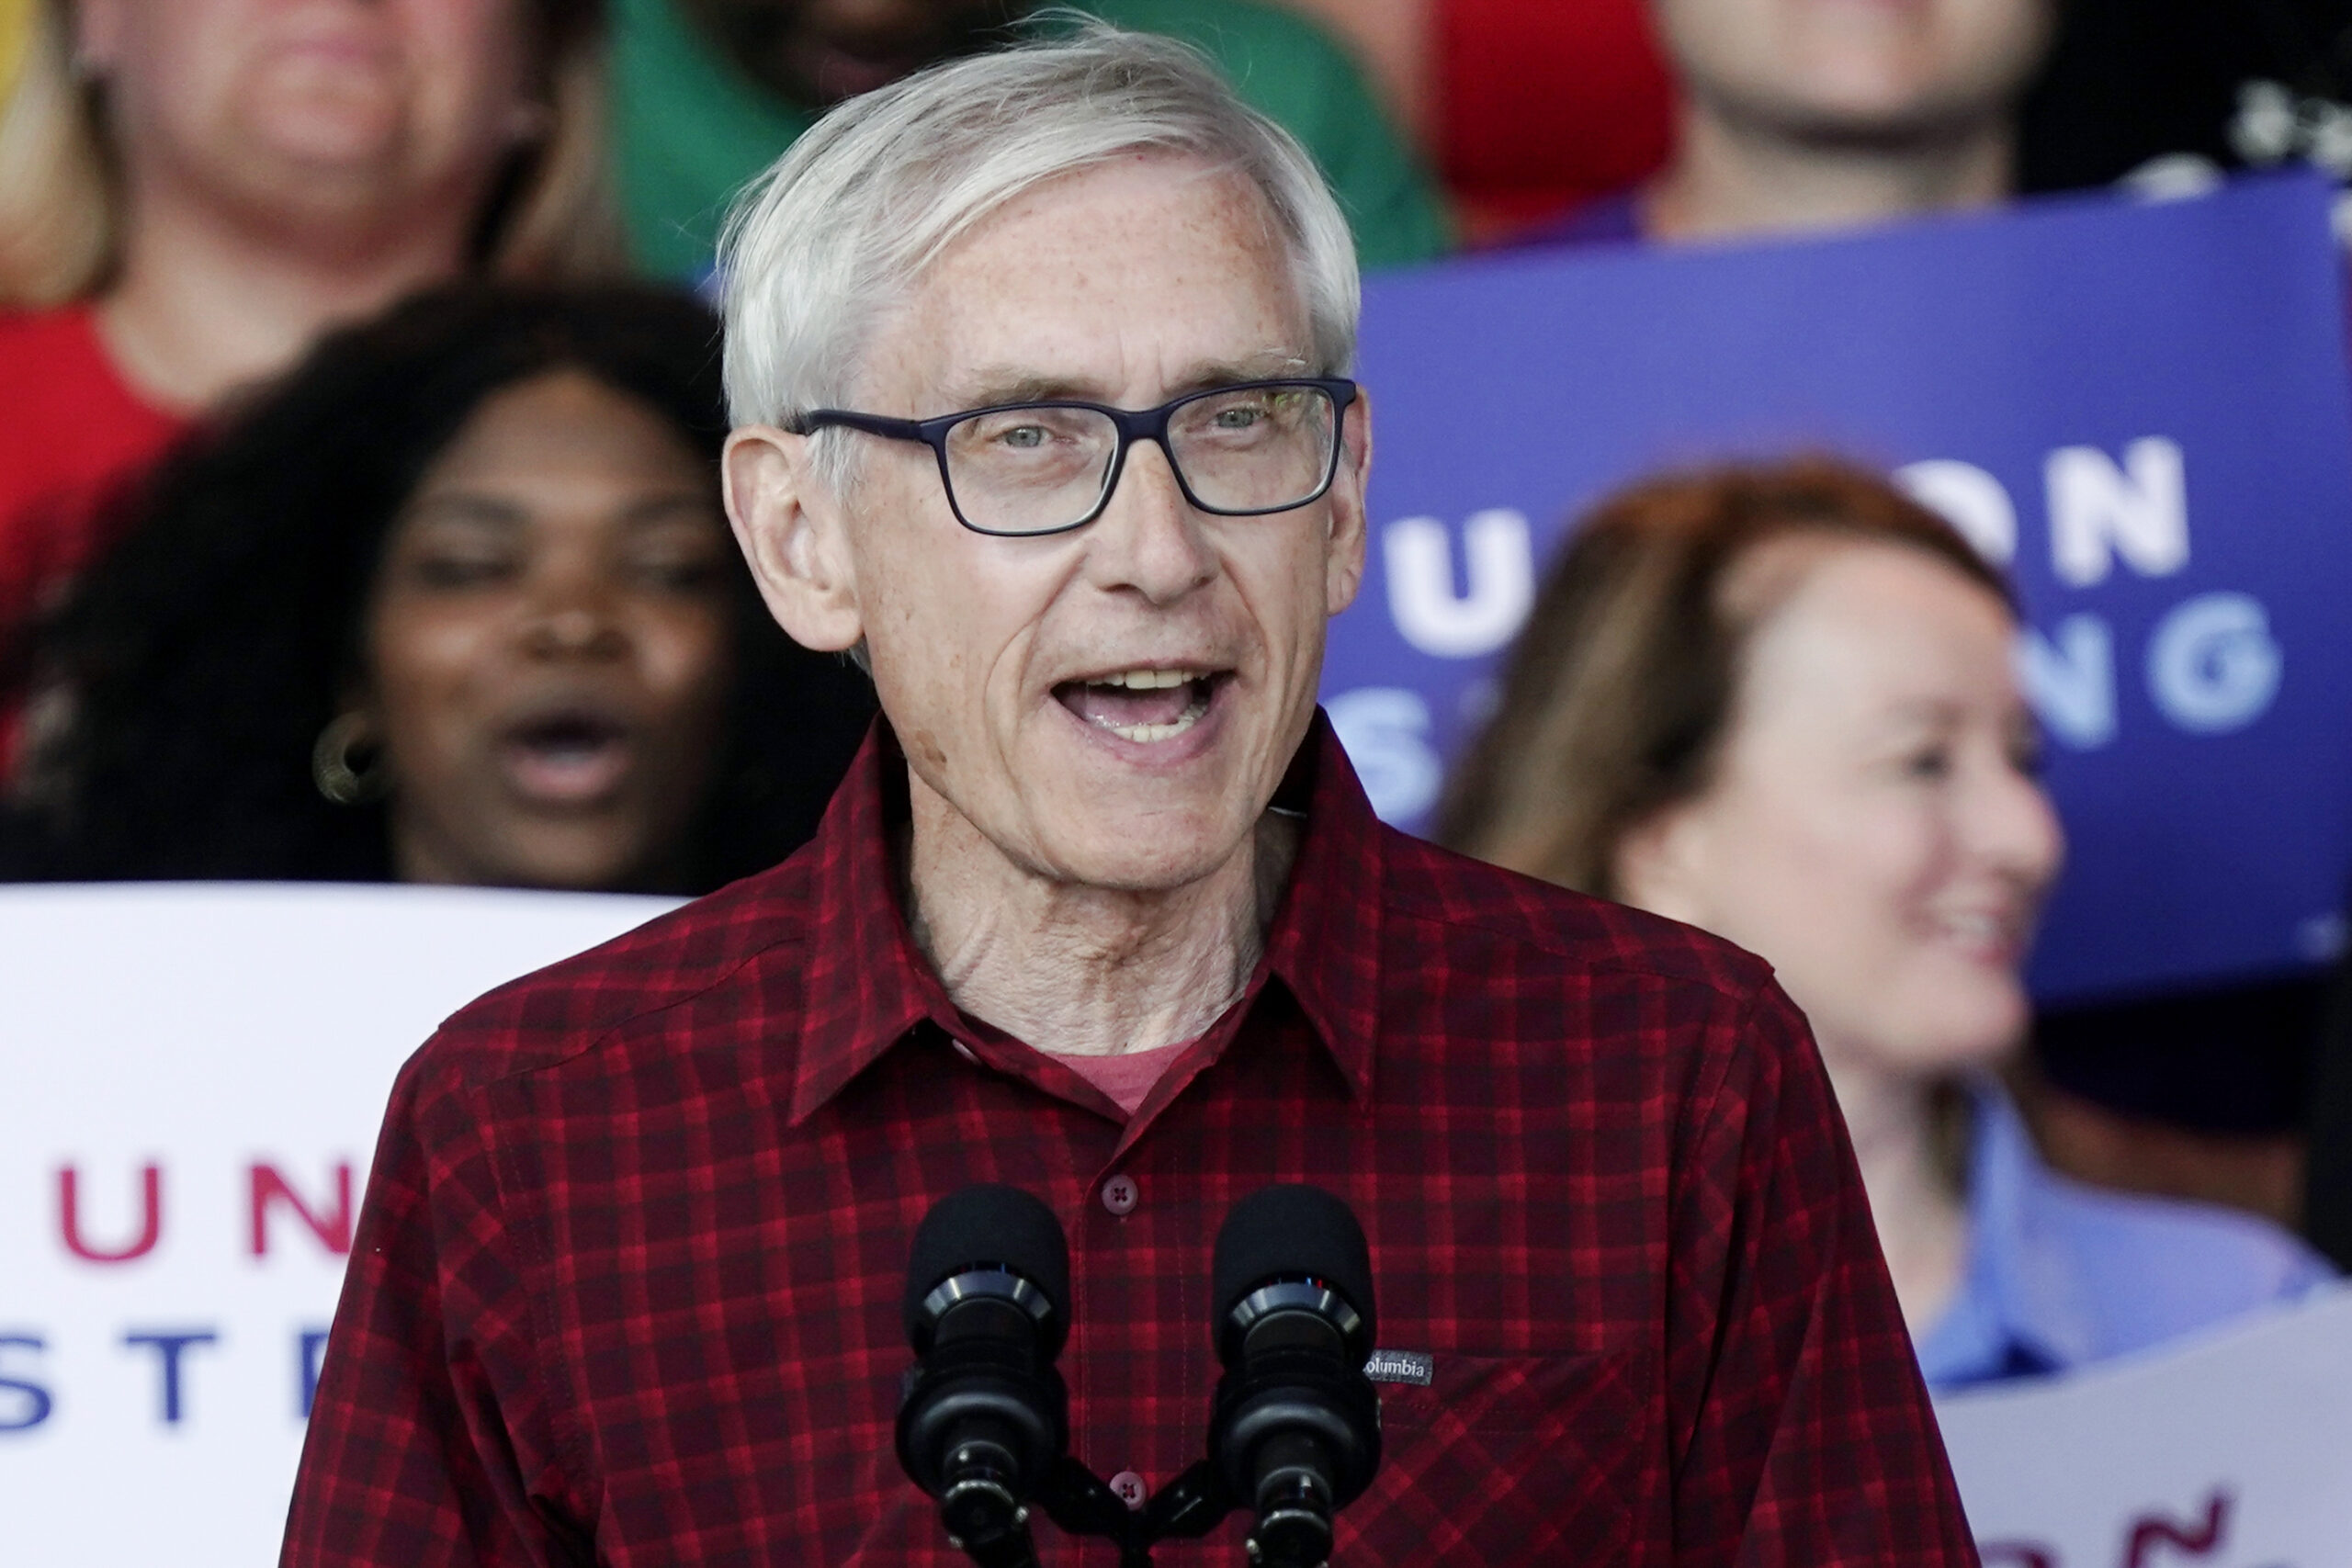 Gov. Tony Evers is starting his second term, but nearly 180 of his appointees remain unconfirmed